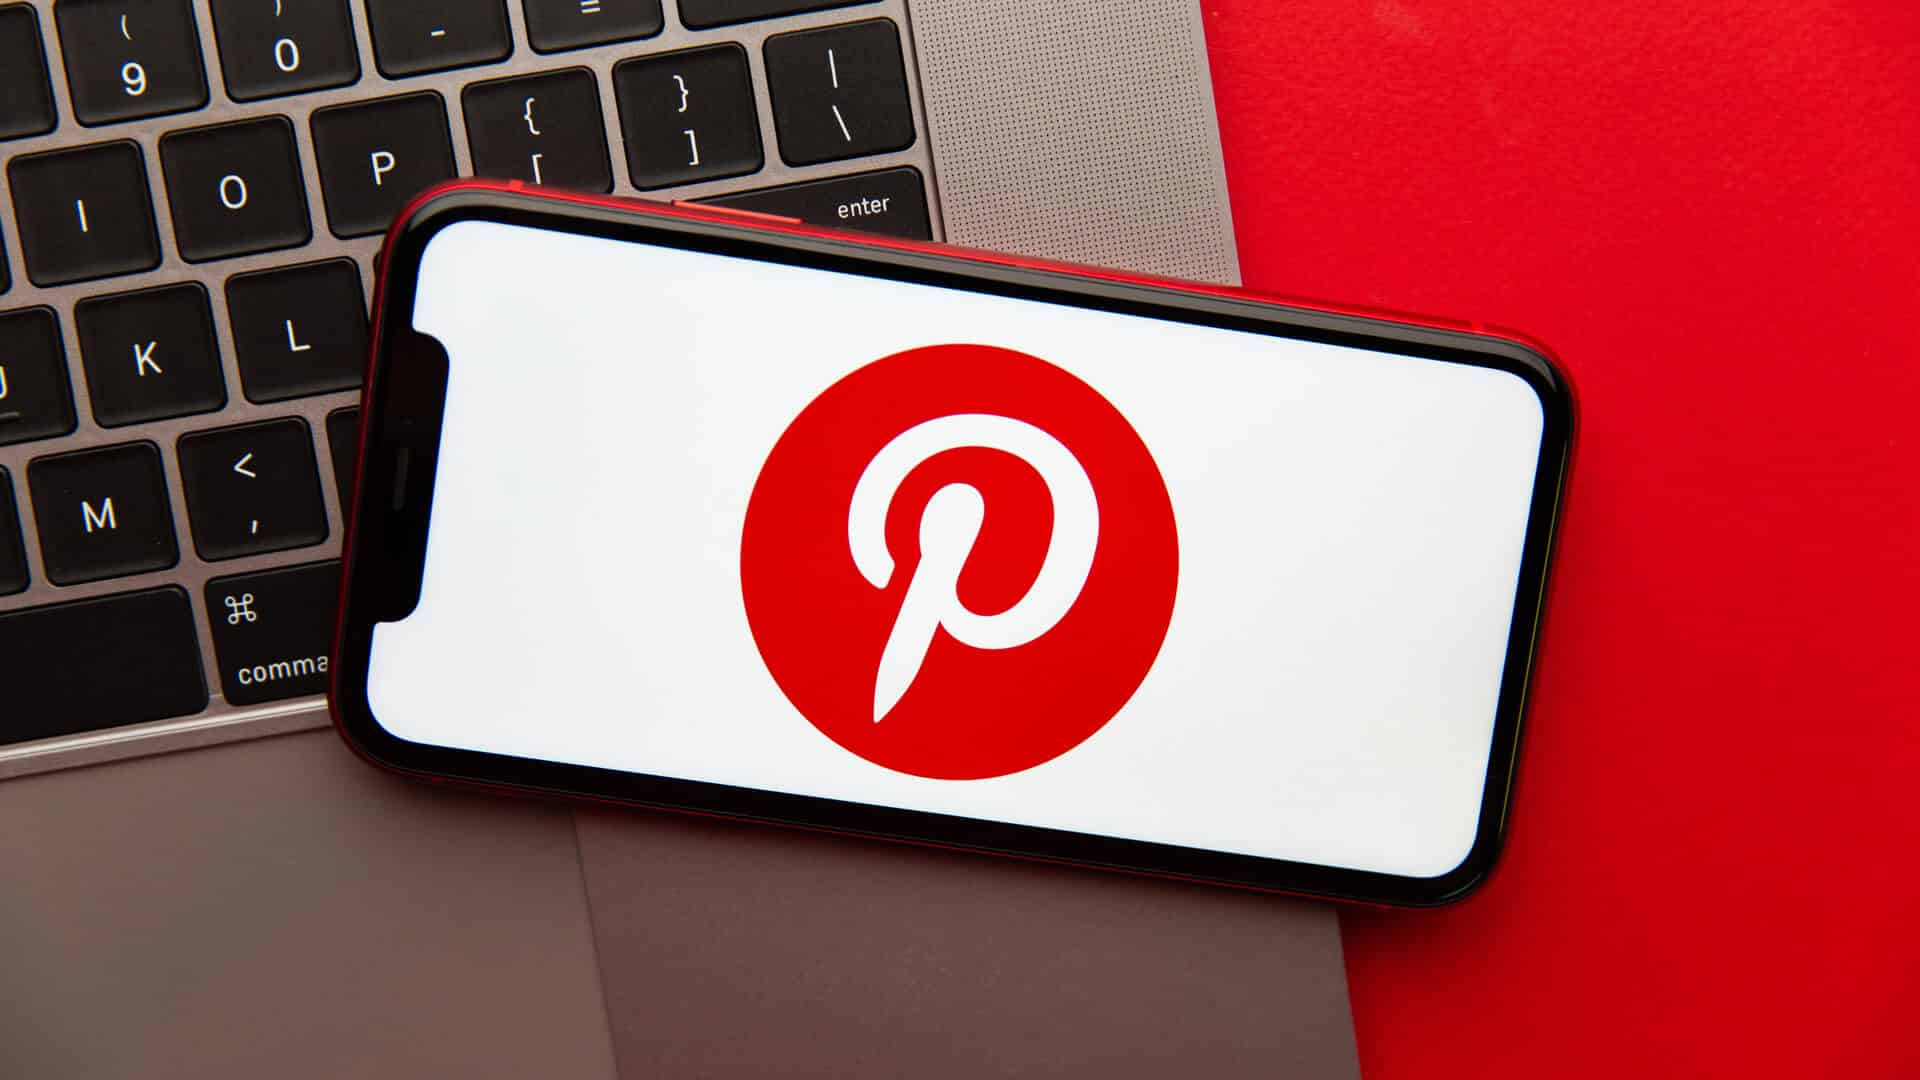 #Pinterest revenue rises 12% as monthly active users reach all-time high